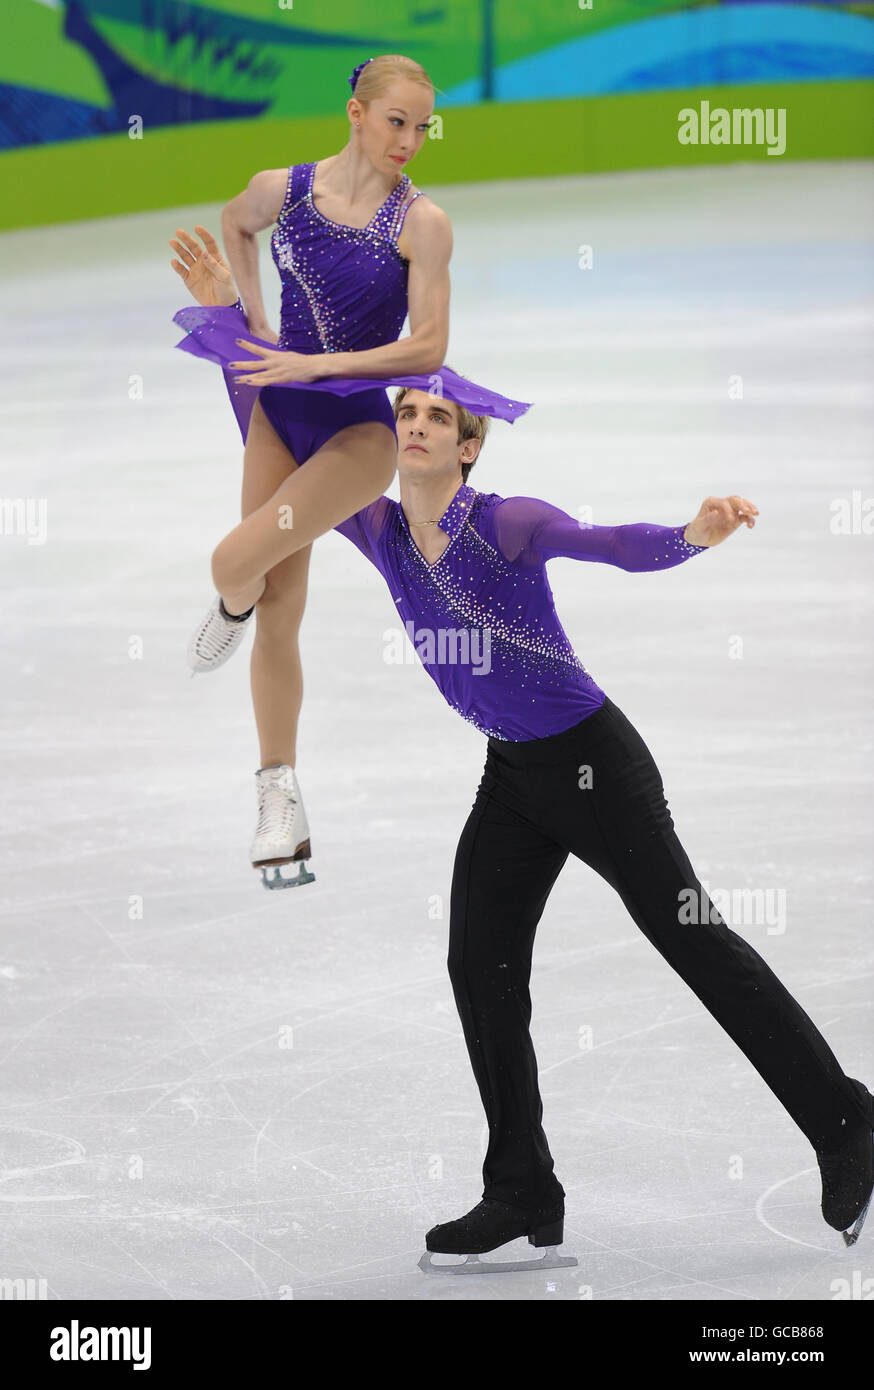 Great Britain's Stacey Kemp and David King in action in the Pairs Short Program at the Pacific Coliseum, Vancouver. Stock Photo